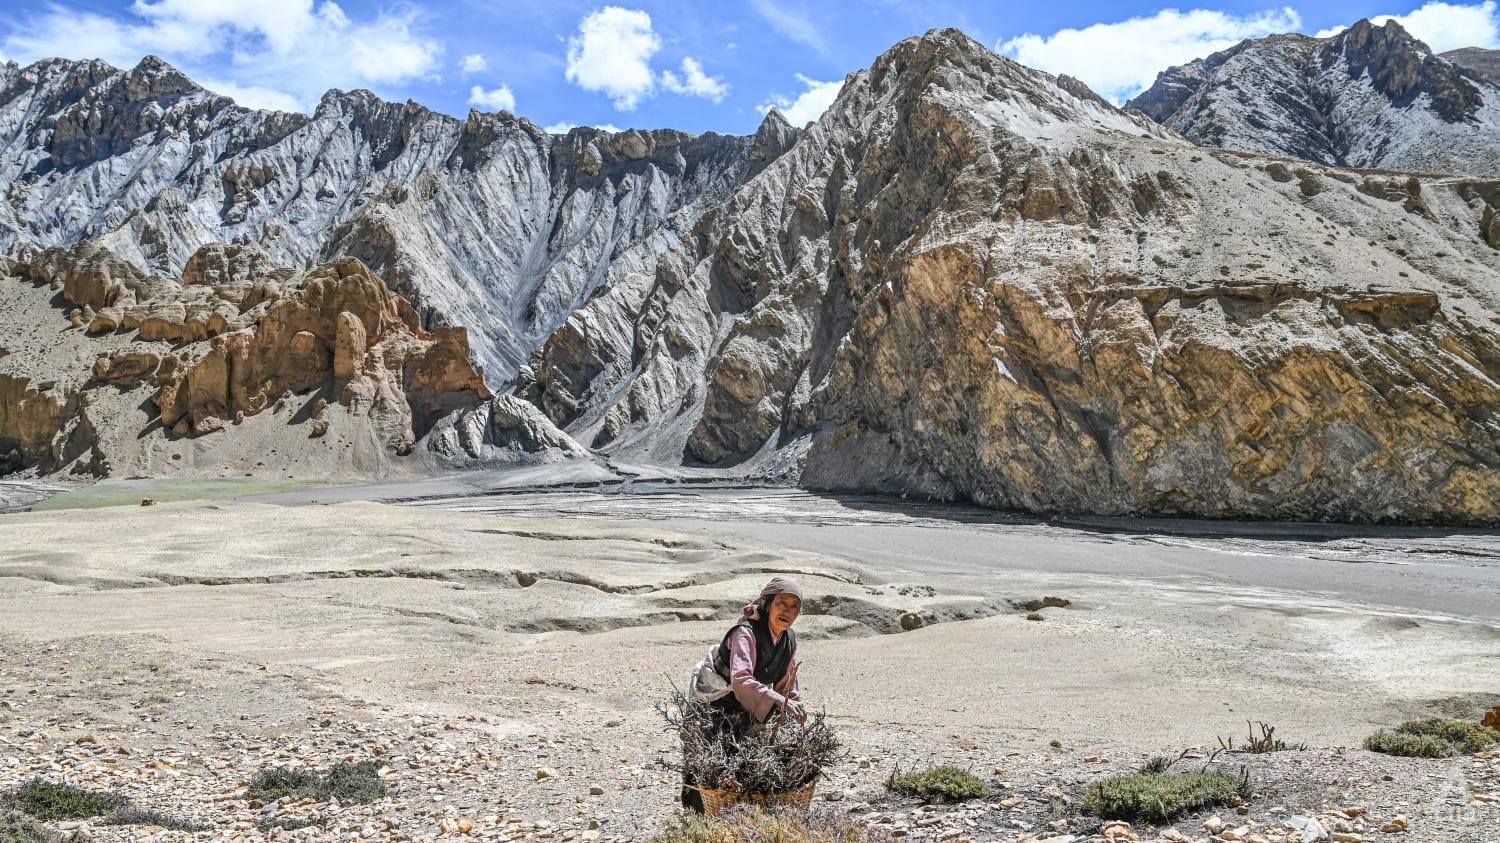 As glaciers melt but water runs dry, climate migrants emerge in Nepal’s last forbidden kingdom